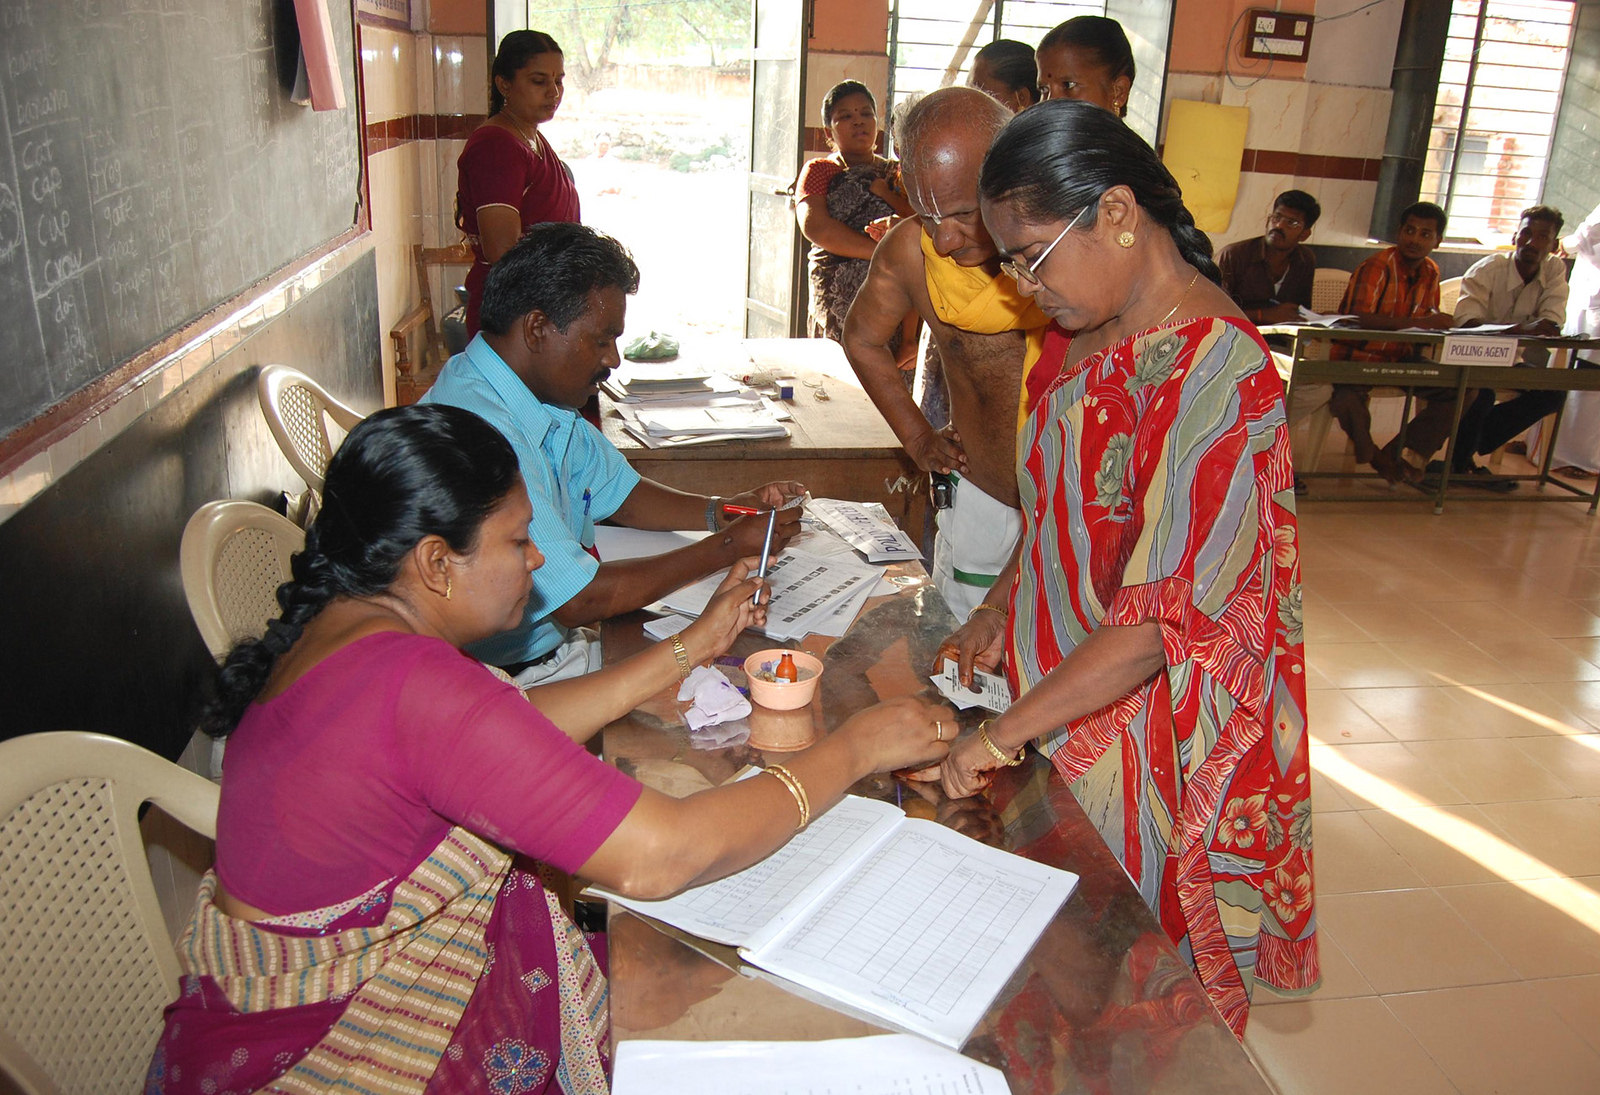 Polling officer administering indelible ink at the finger of a female voter at a polling booth. (Source: Flickr/Public.Resource.Org)